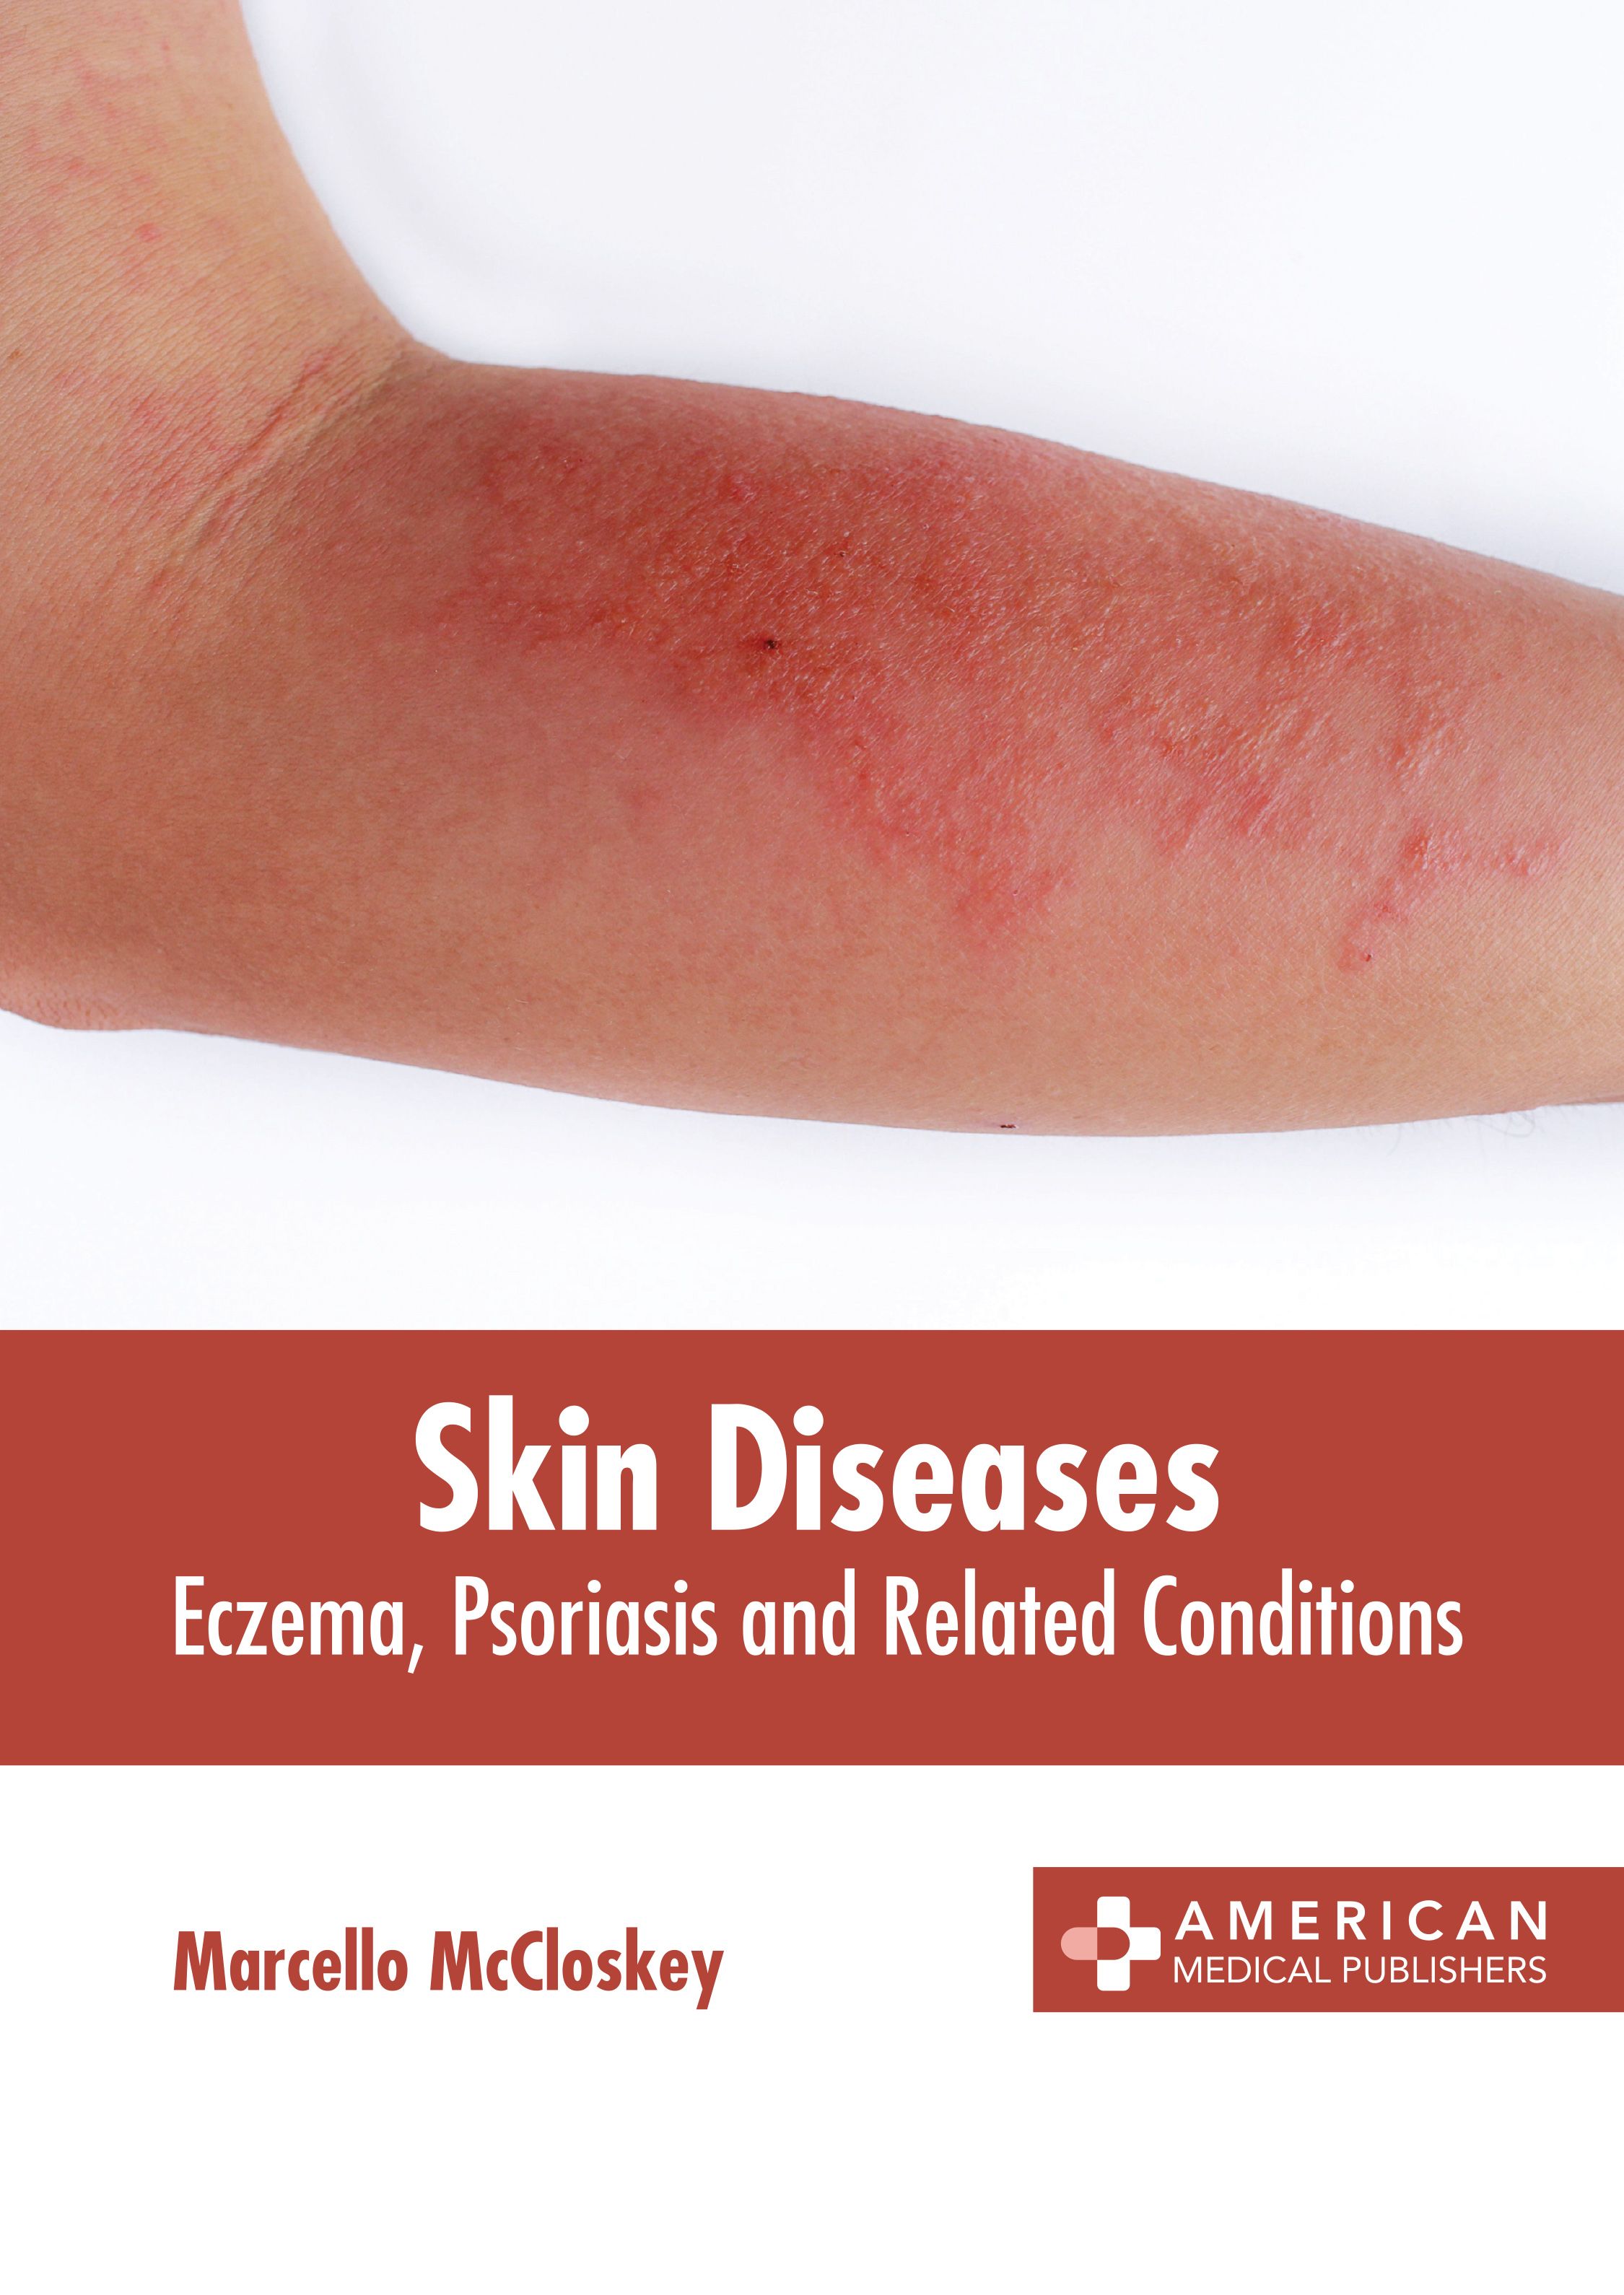 

exclusive-publishers/american-medical-publishers/skin-diseases-eczema-psoriasis-and-related-conditions-9781639278053